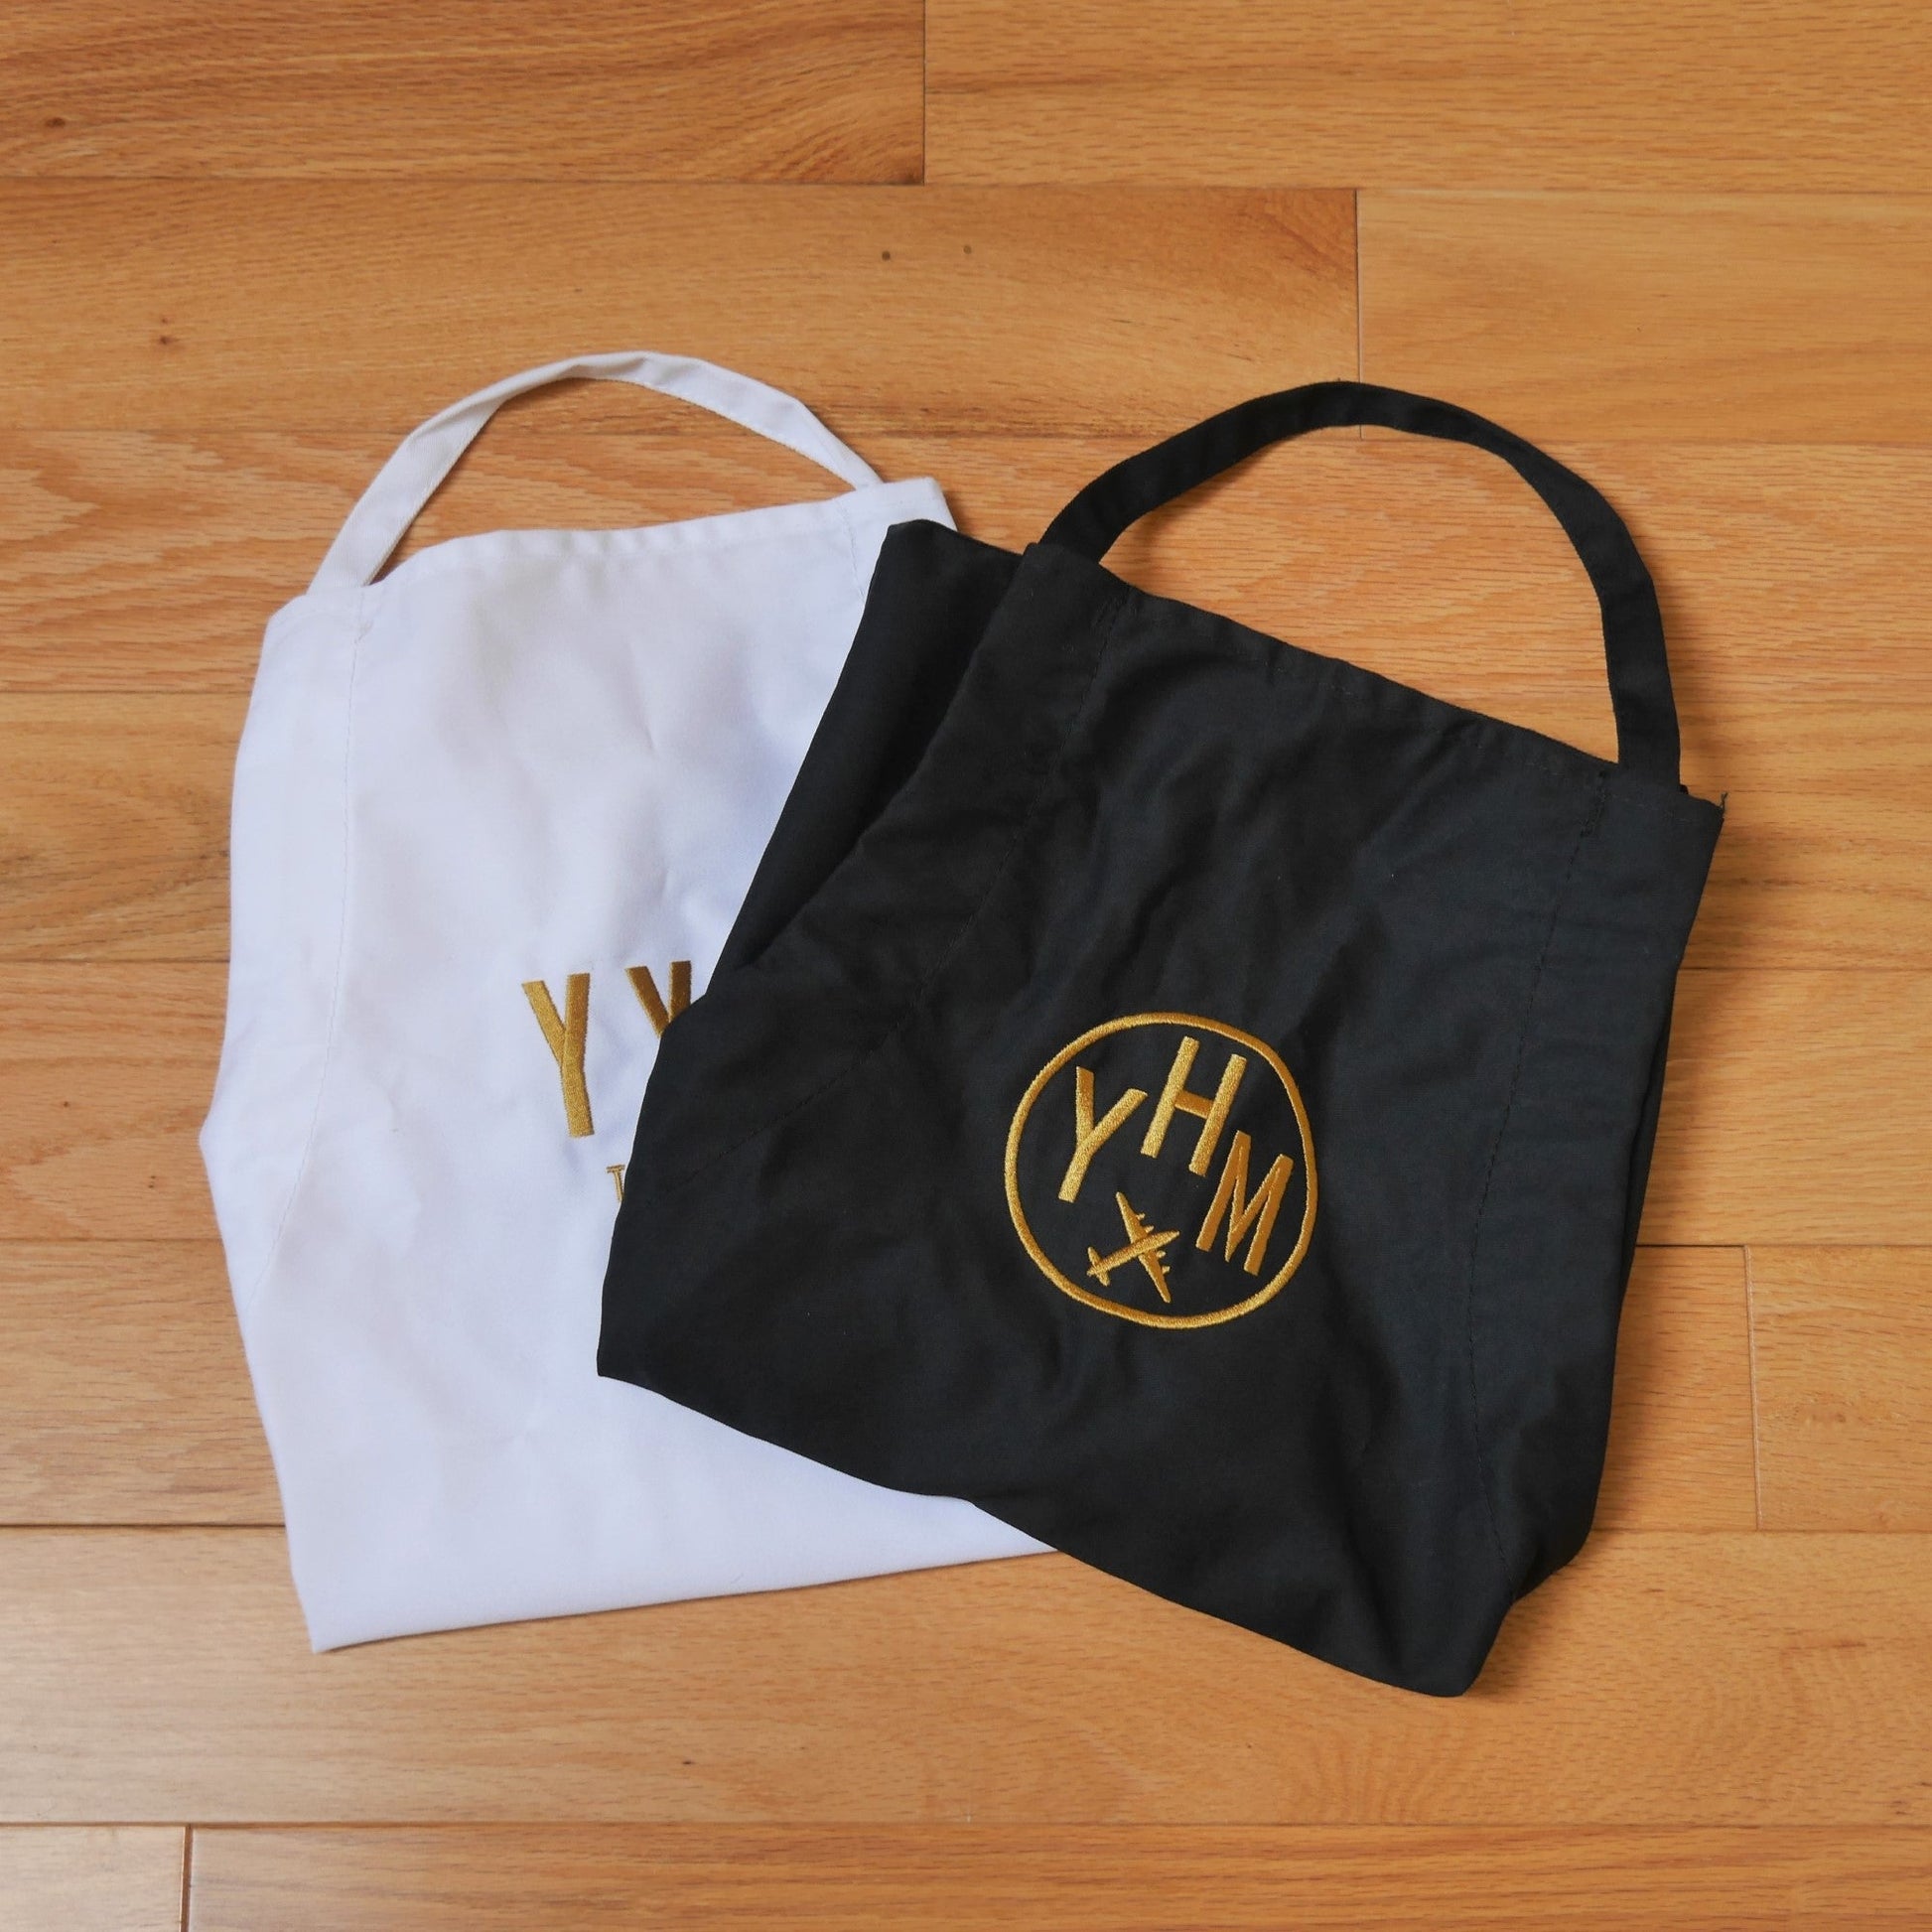 City Embroidered Apron - Old Gold • CMH Columbus • YHM Designs - Image 14